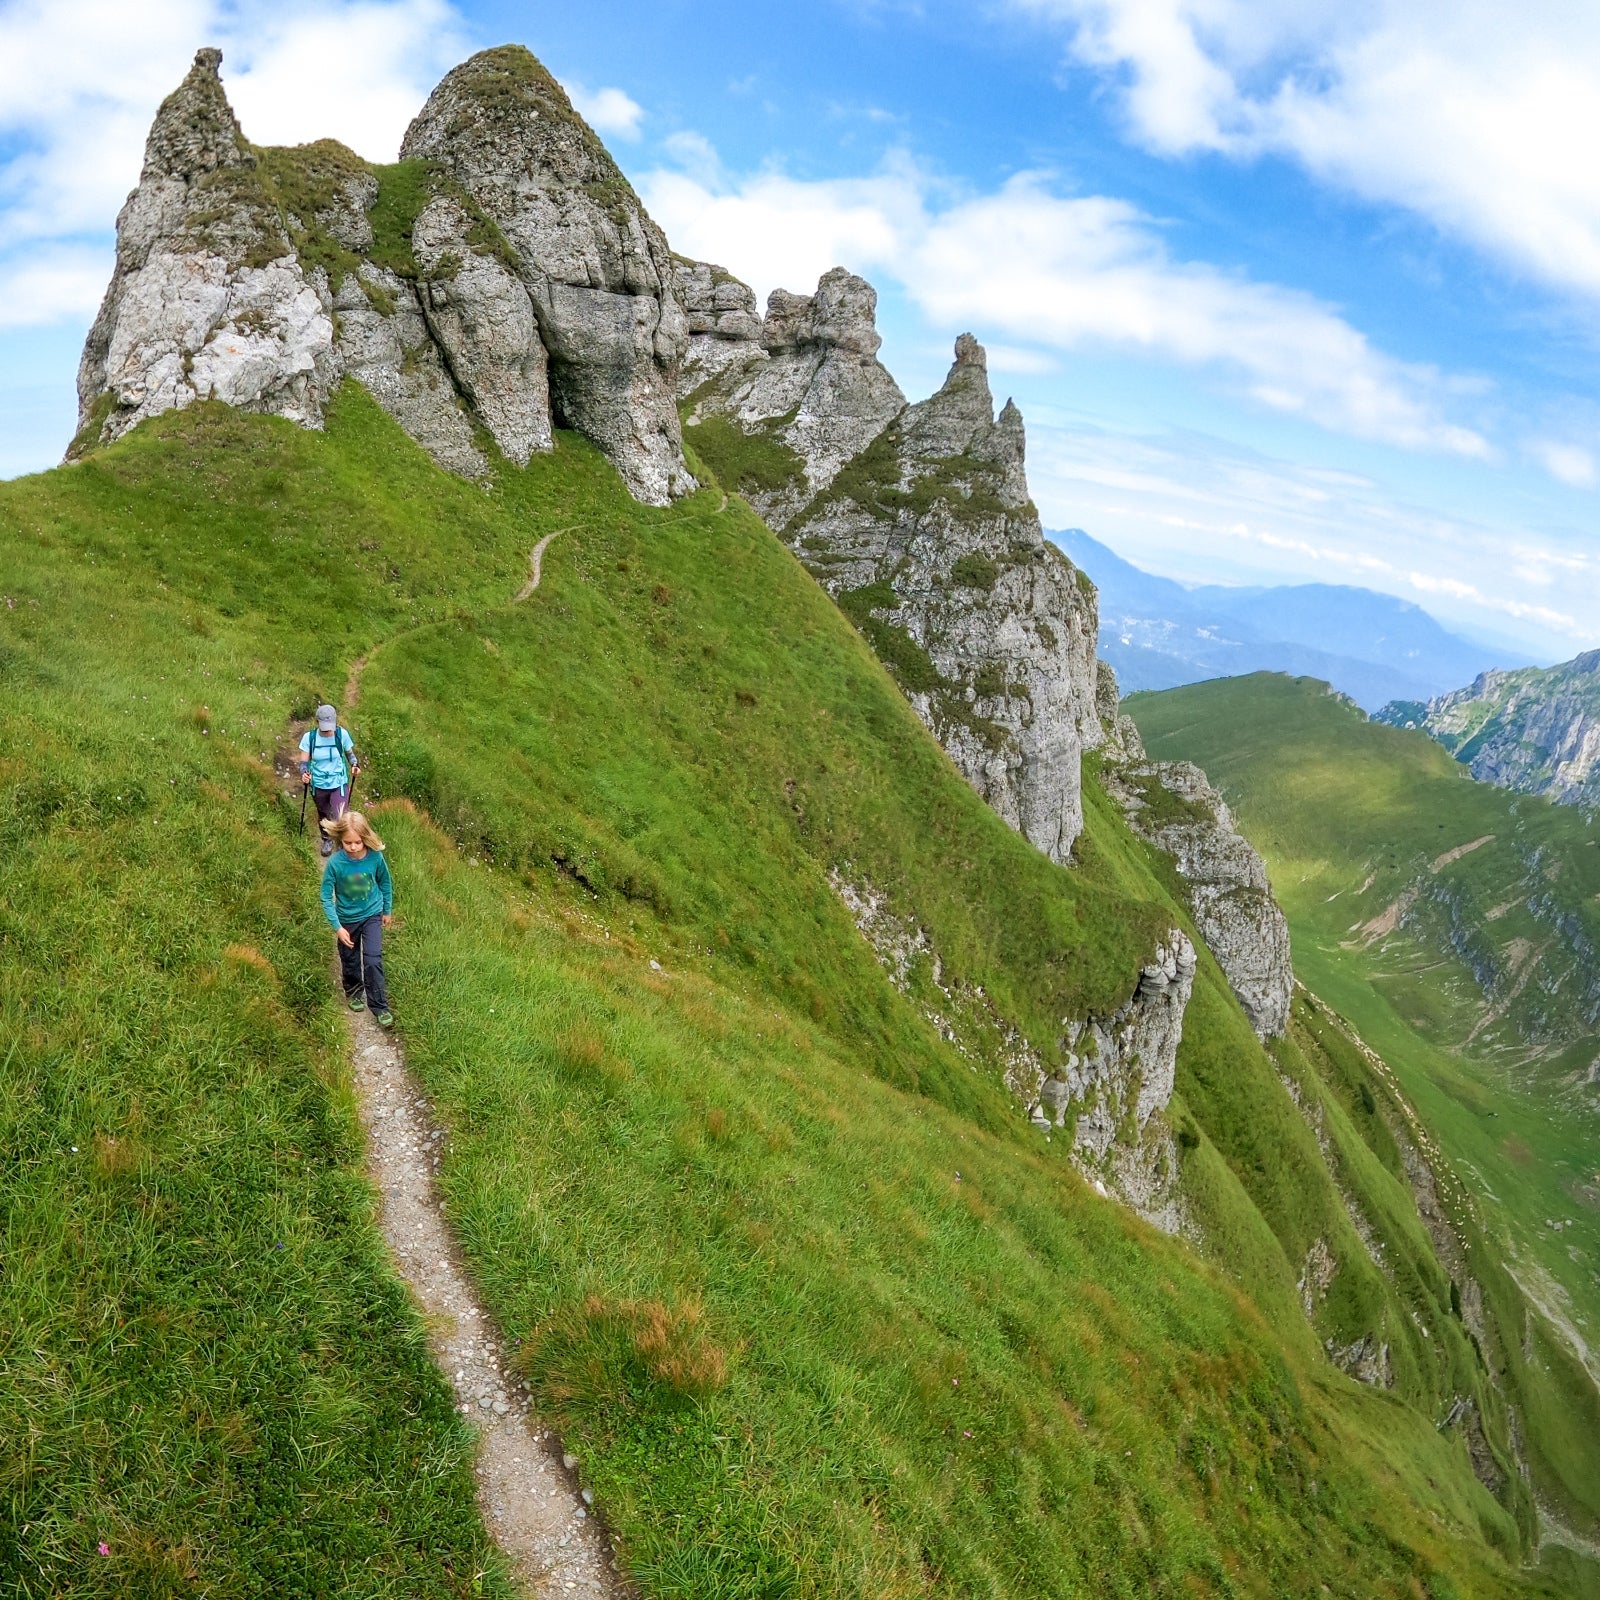 A mother and child wend down the trail high atop central Romania’s steep, green Bucegi Mountains.